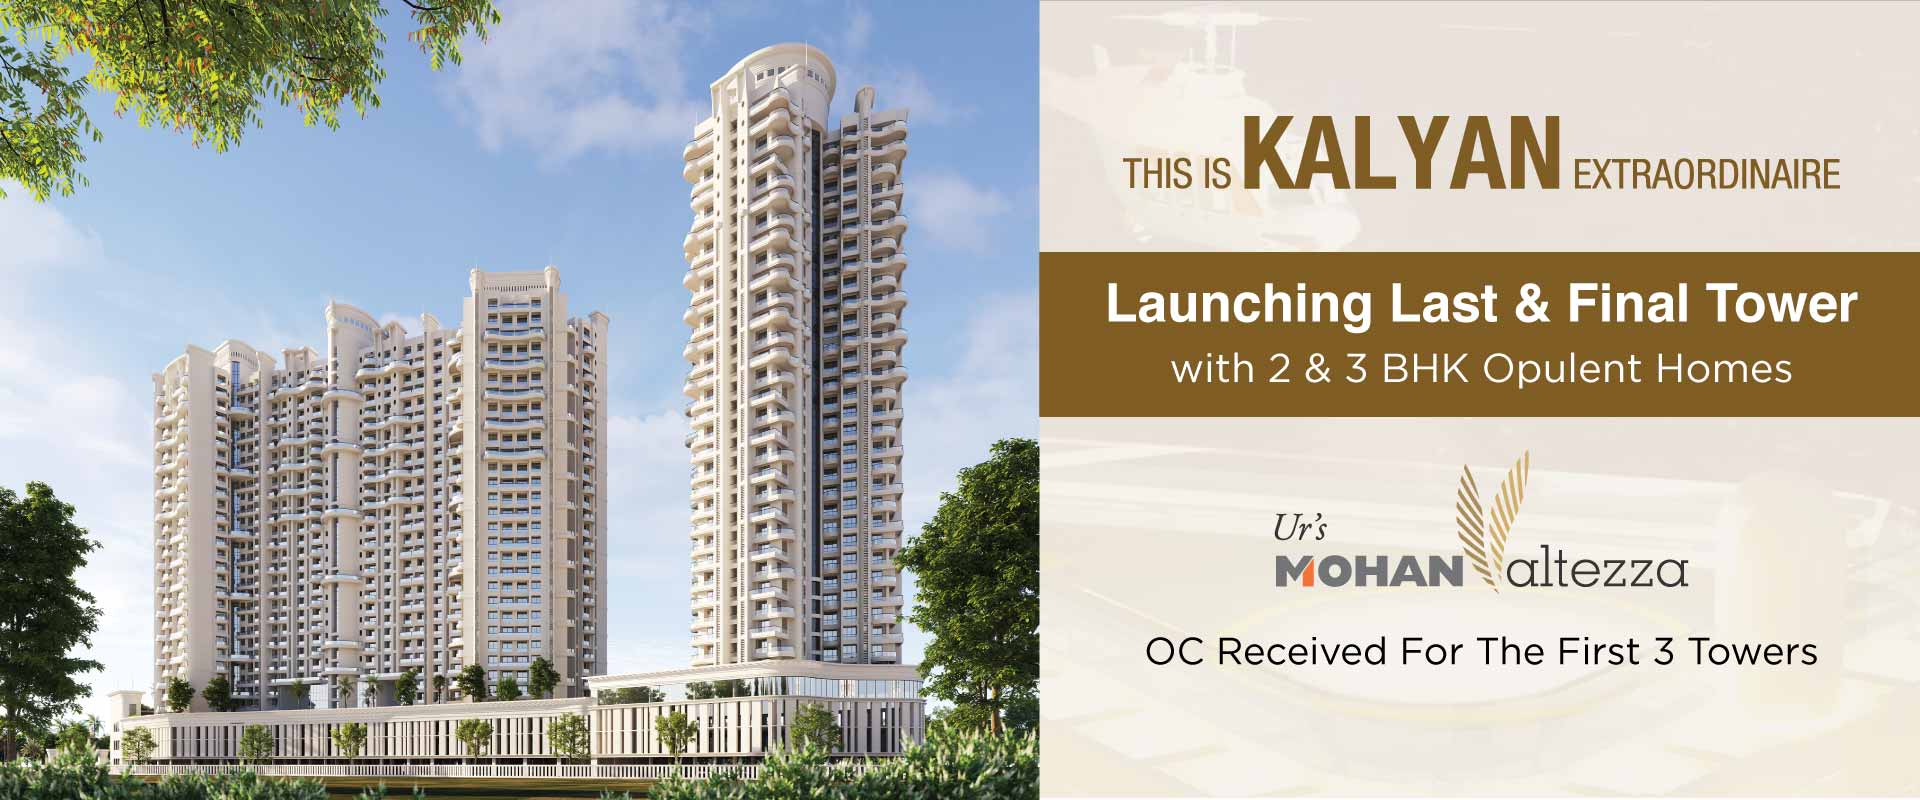 new project in kalyan by mohan altezza